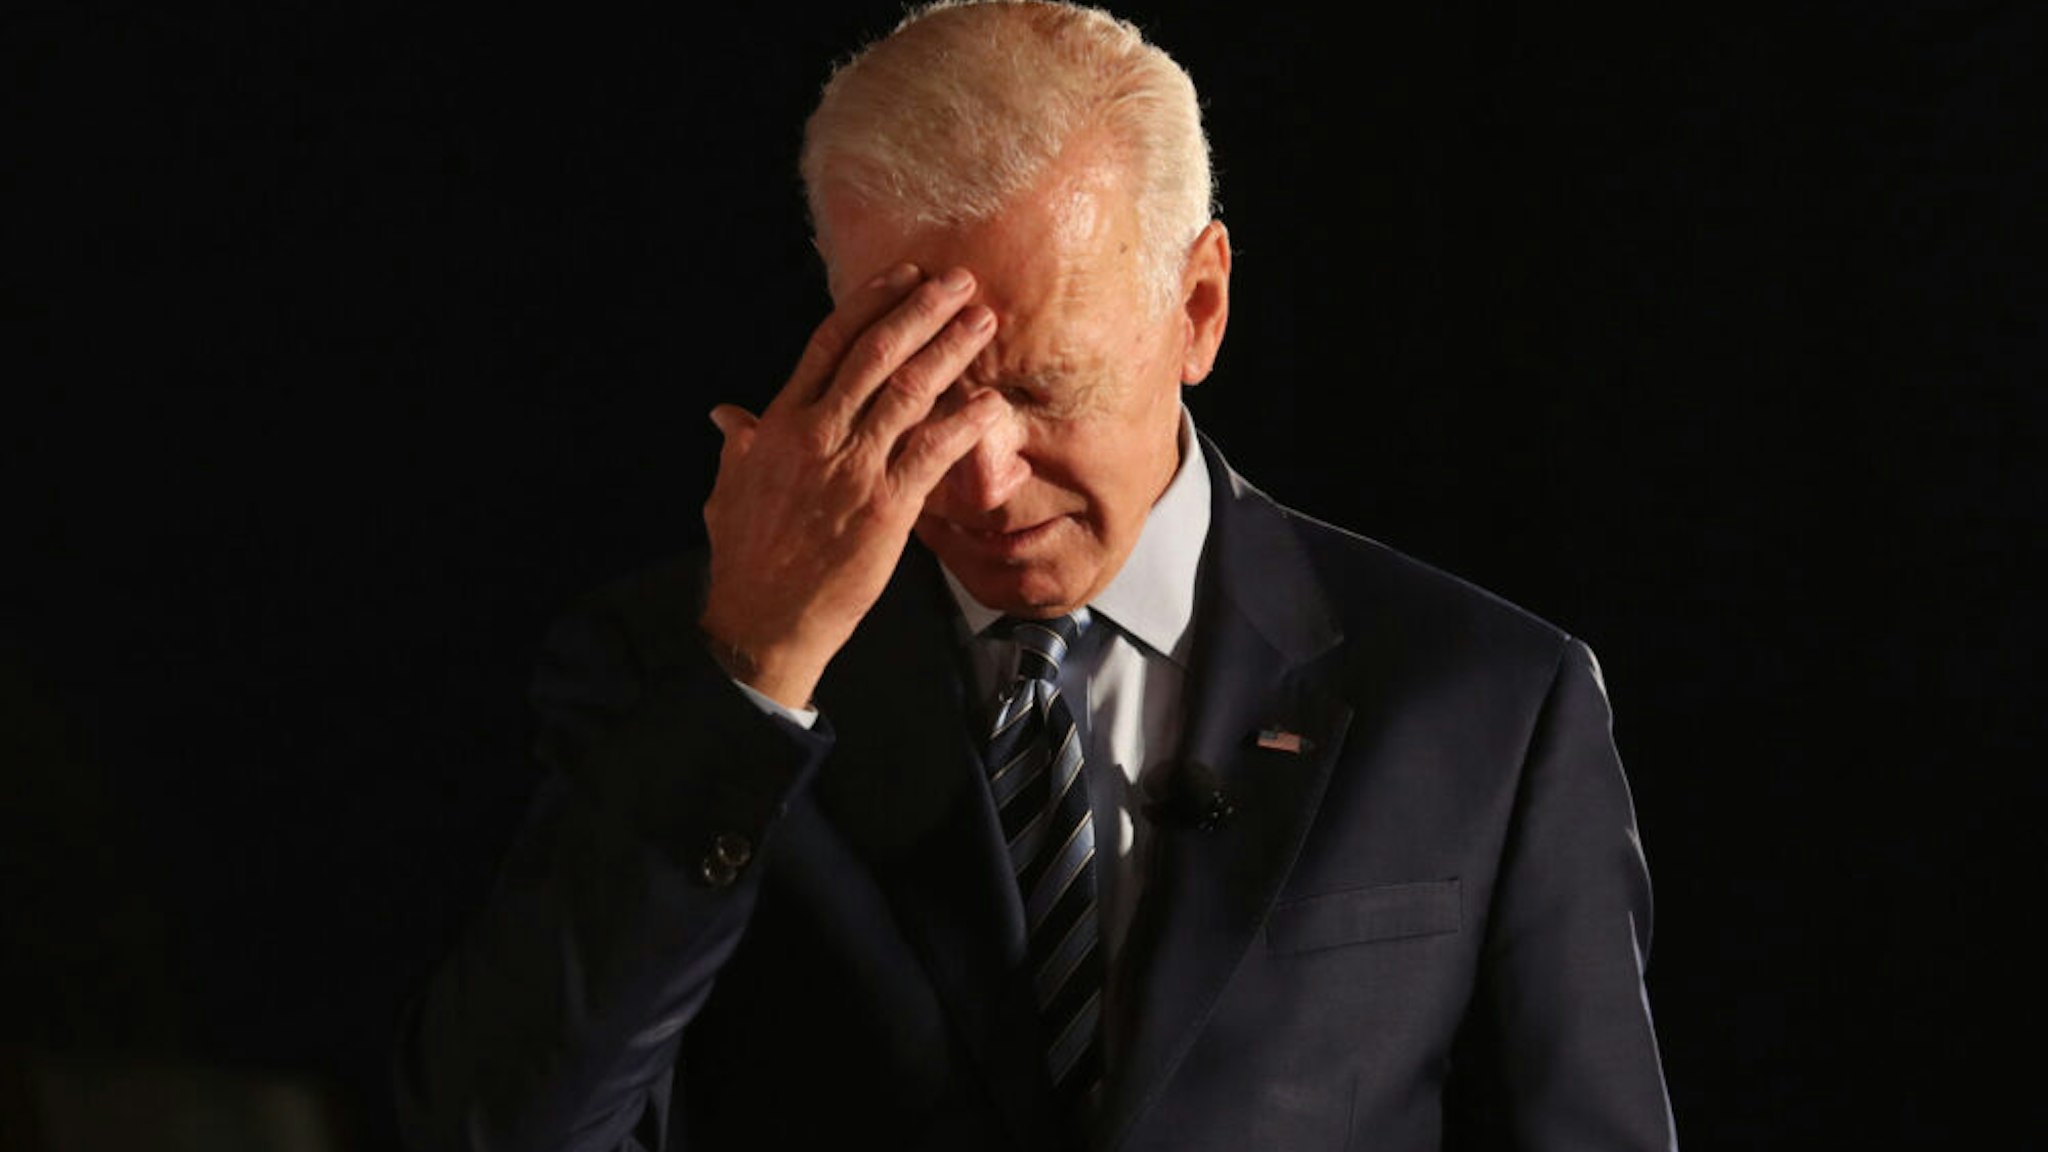 DES MOINES, IOWA - JULY 15: Democratic presidential candidate former U.S. Vice President Joe Biden pauses as he speaks during the AARP and The Des Moines Register Iowa Presidential Candidate Forum at Drake University on July 15, 2019 in Des Moines, Iowa. Twenty Democratic presidential candidates are participating in the forums that will feature four candidate per forum, to be held in cities across Iowa over five days.